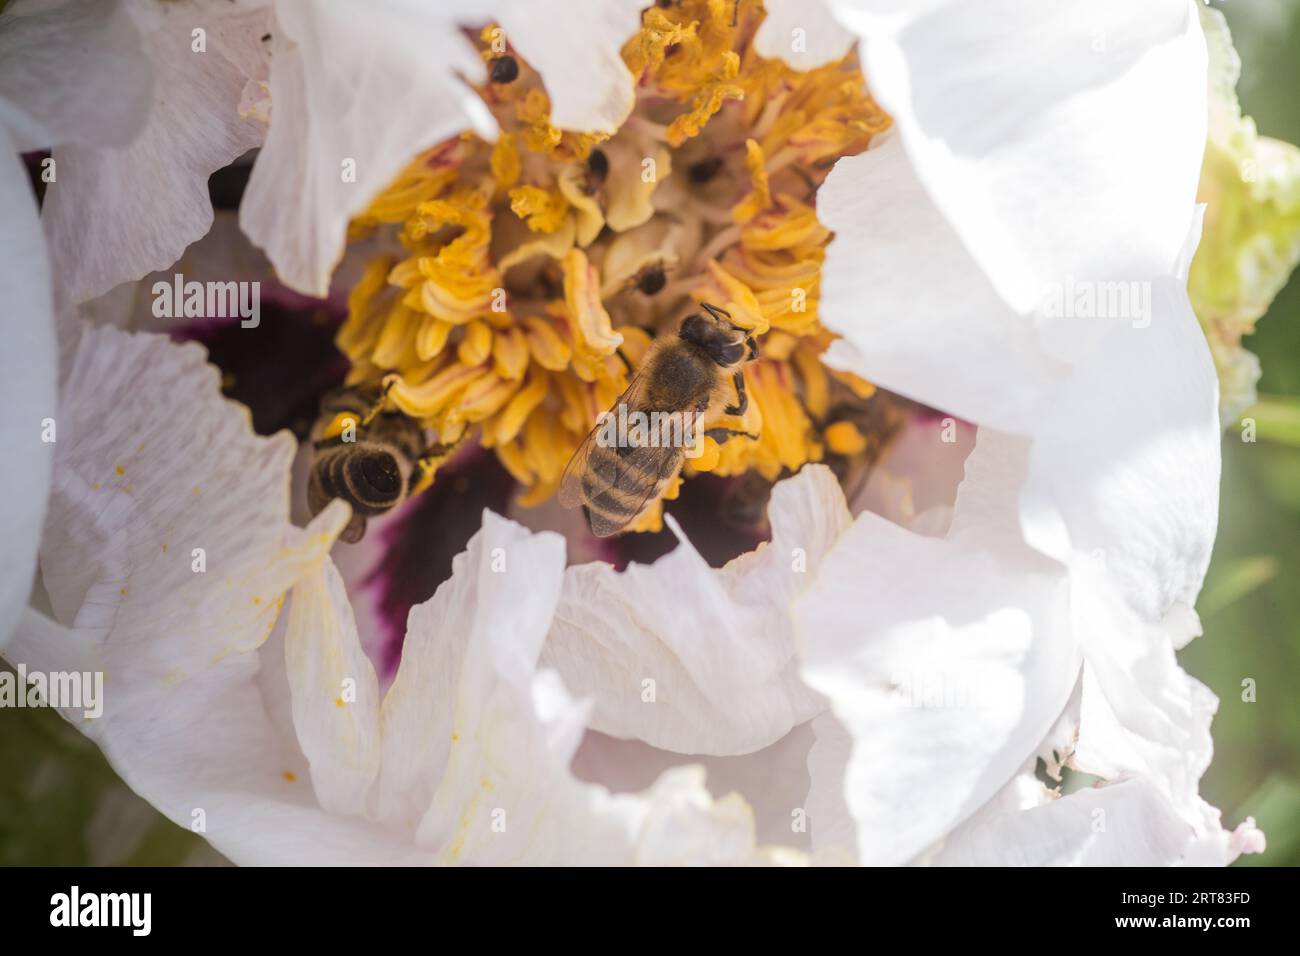 Bees collect pollen from Paeonia suffruticosa, tree peony or paeony flower. There are many bees inside the flower. Stock Photo